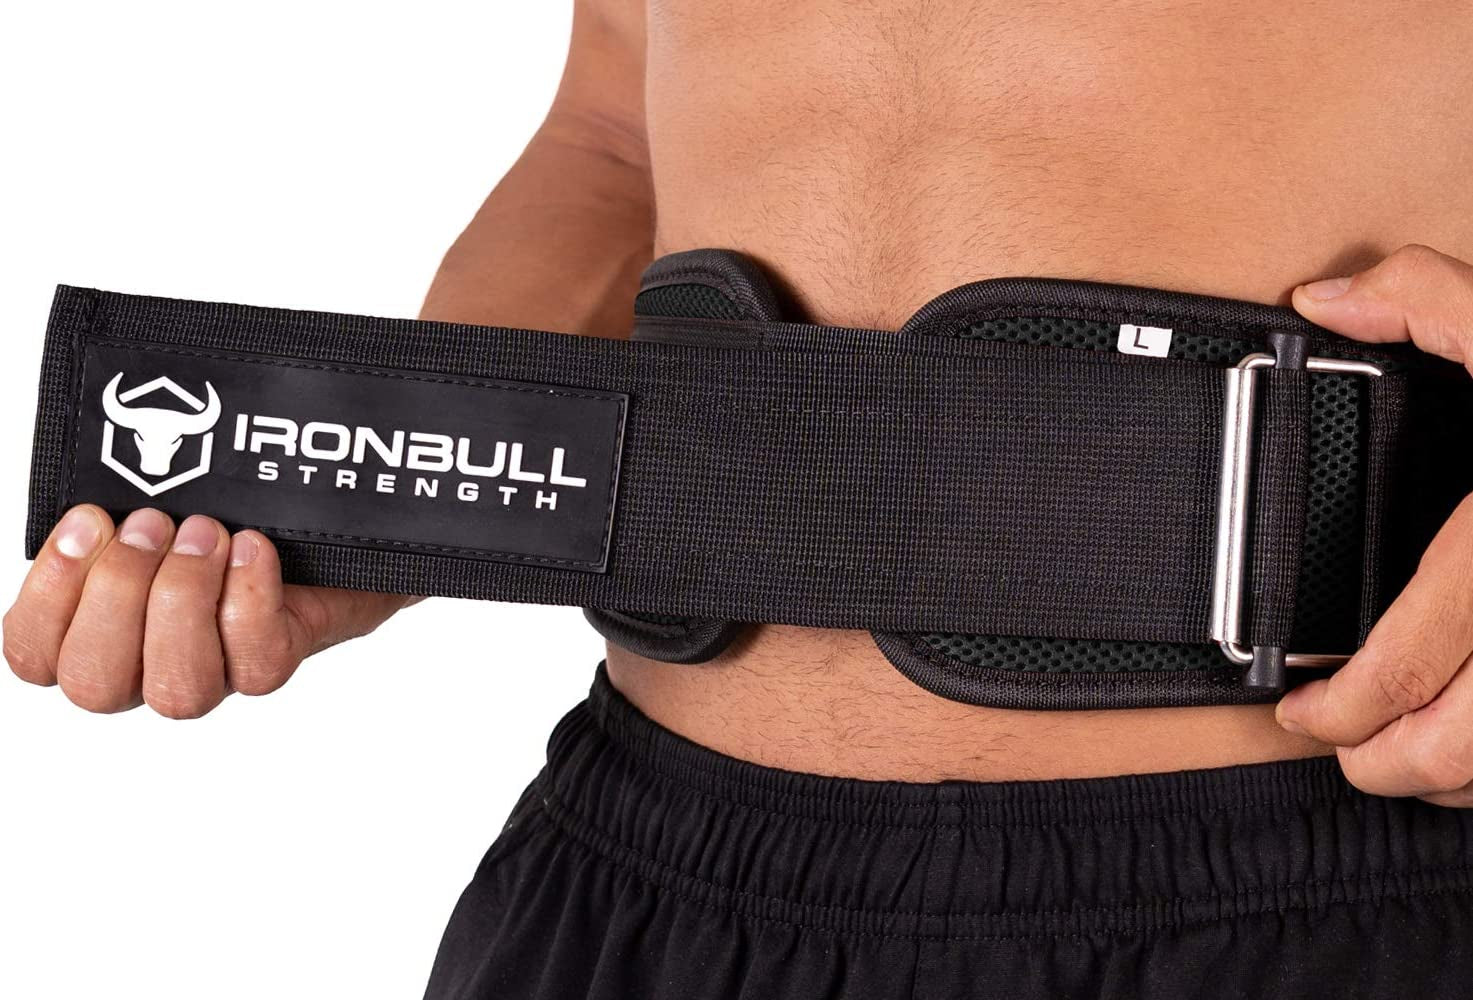 "Premium 6 Inch Weightlifting Belt by Ultimate Support - Ideal for Both Men and Women, Enhance Your Fitness and Powerlifting Regimen with Automatic Back Support for Lifting, Cross Training, and Beyond!"